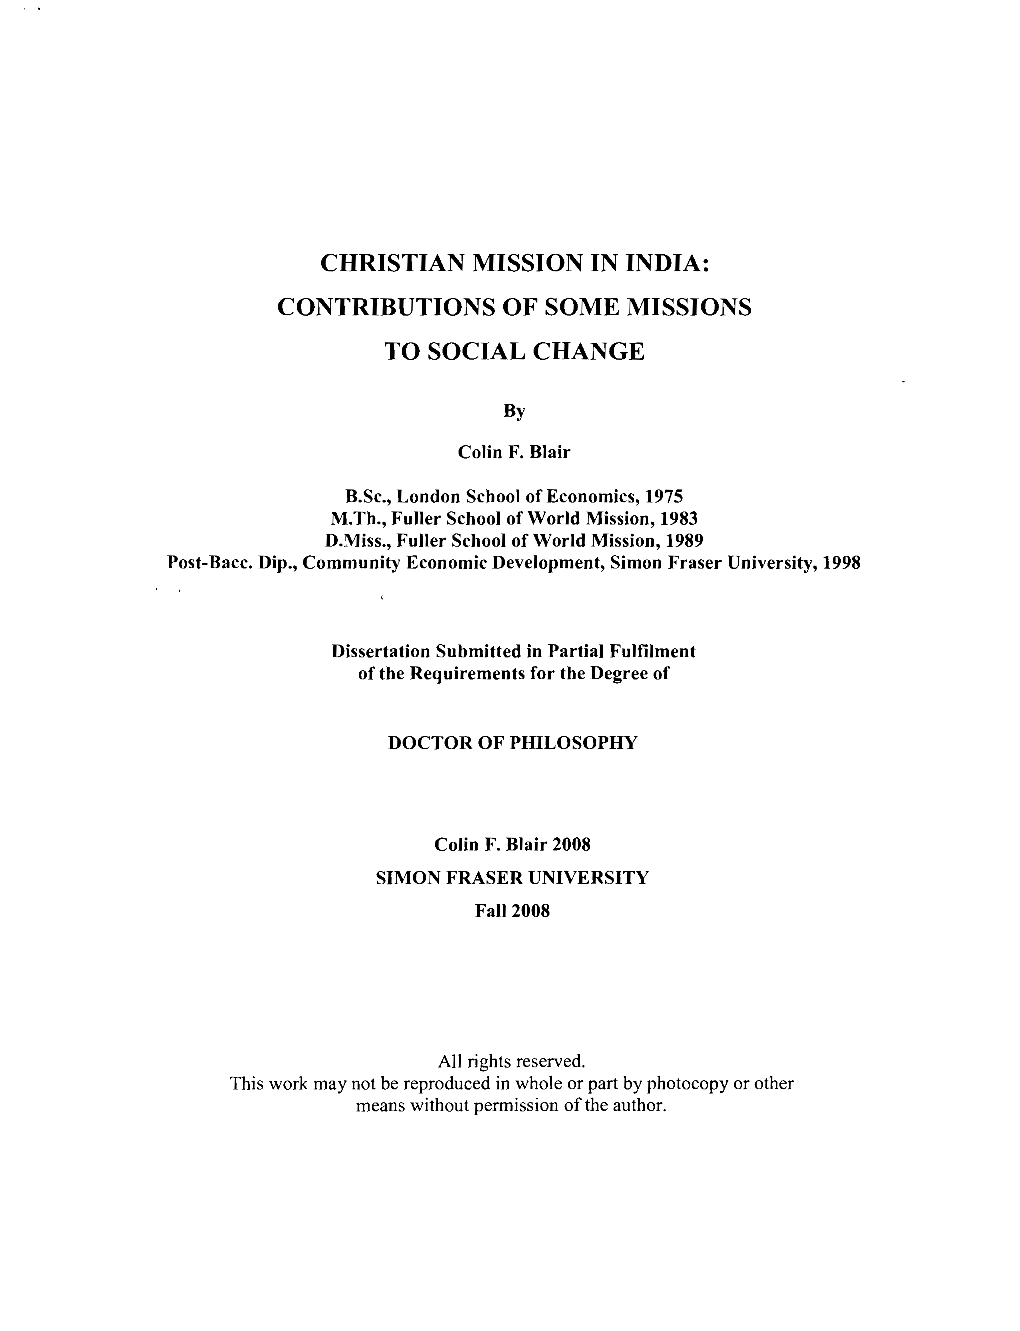 Christian Mission in India: Contributions of Some Missions to Social Change